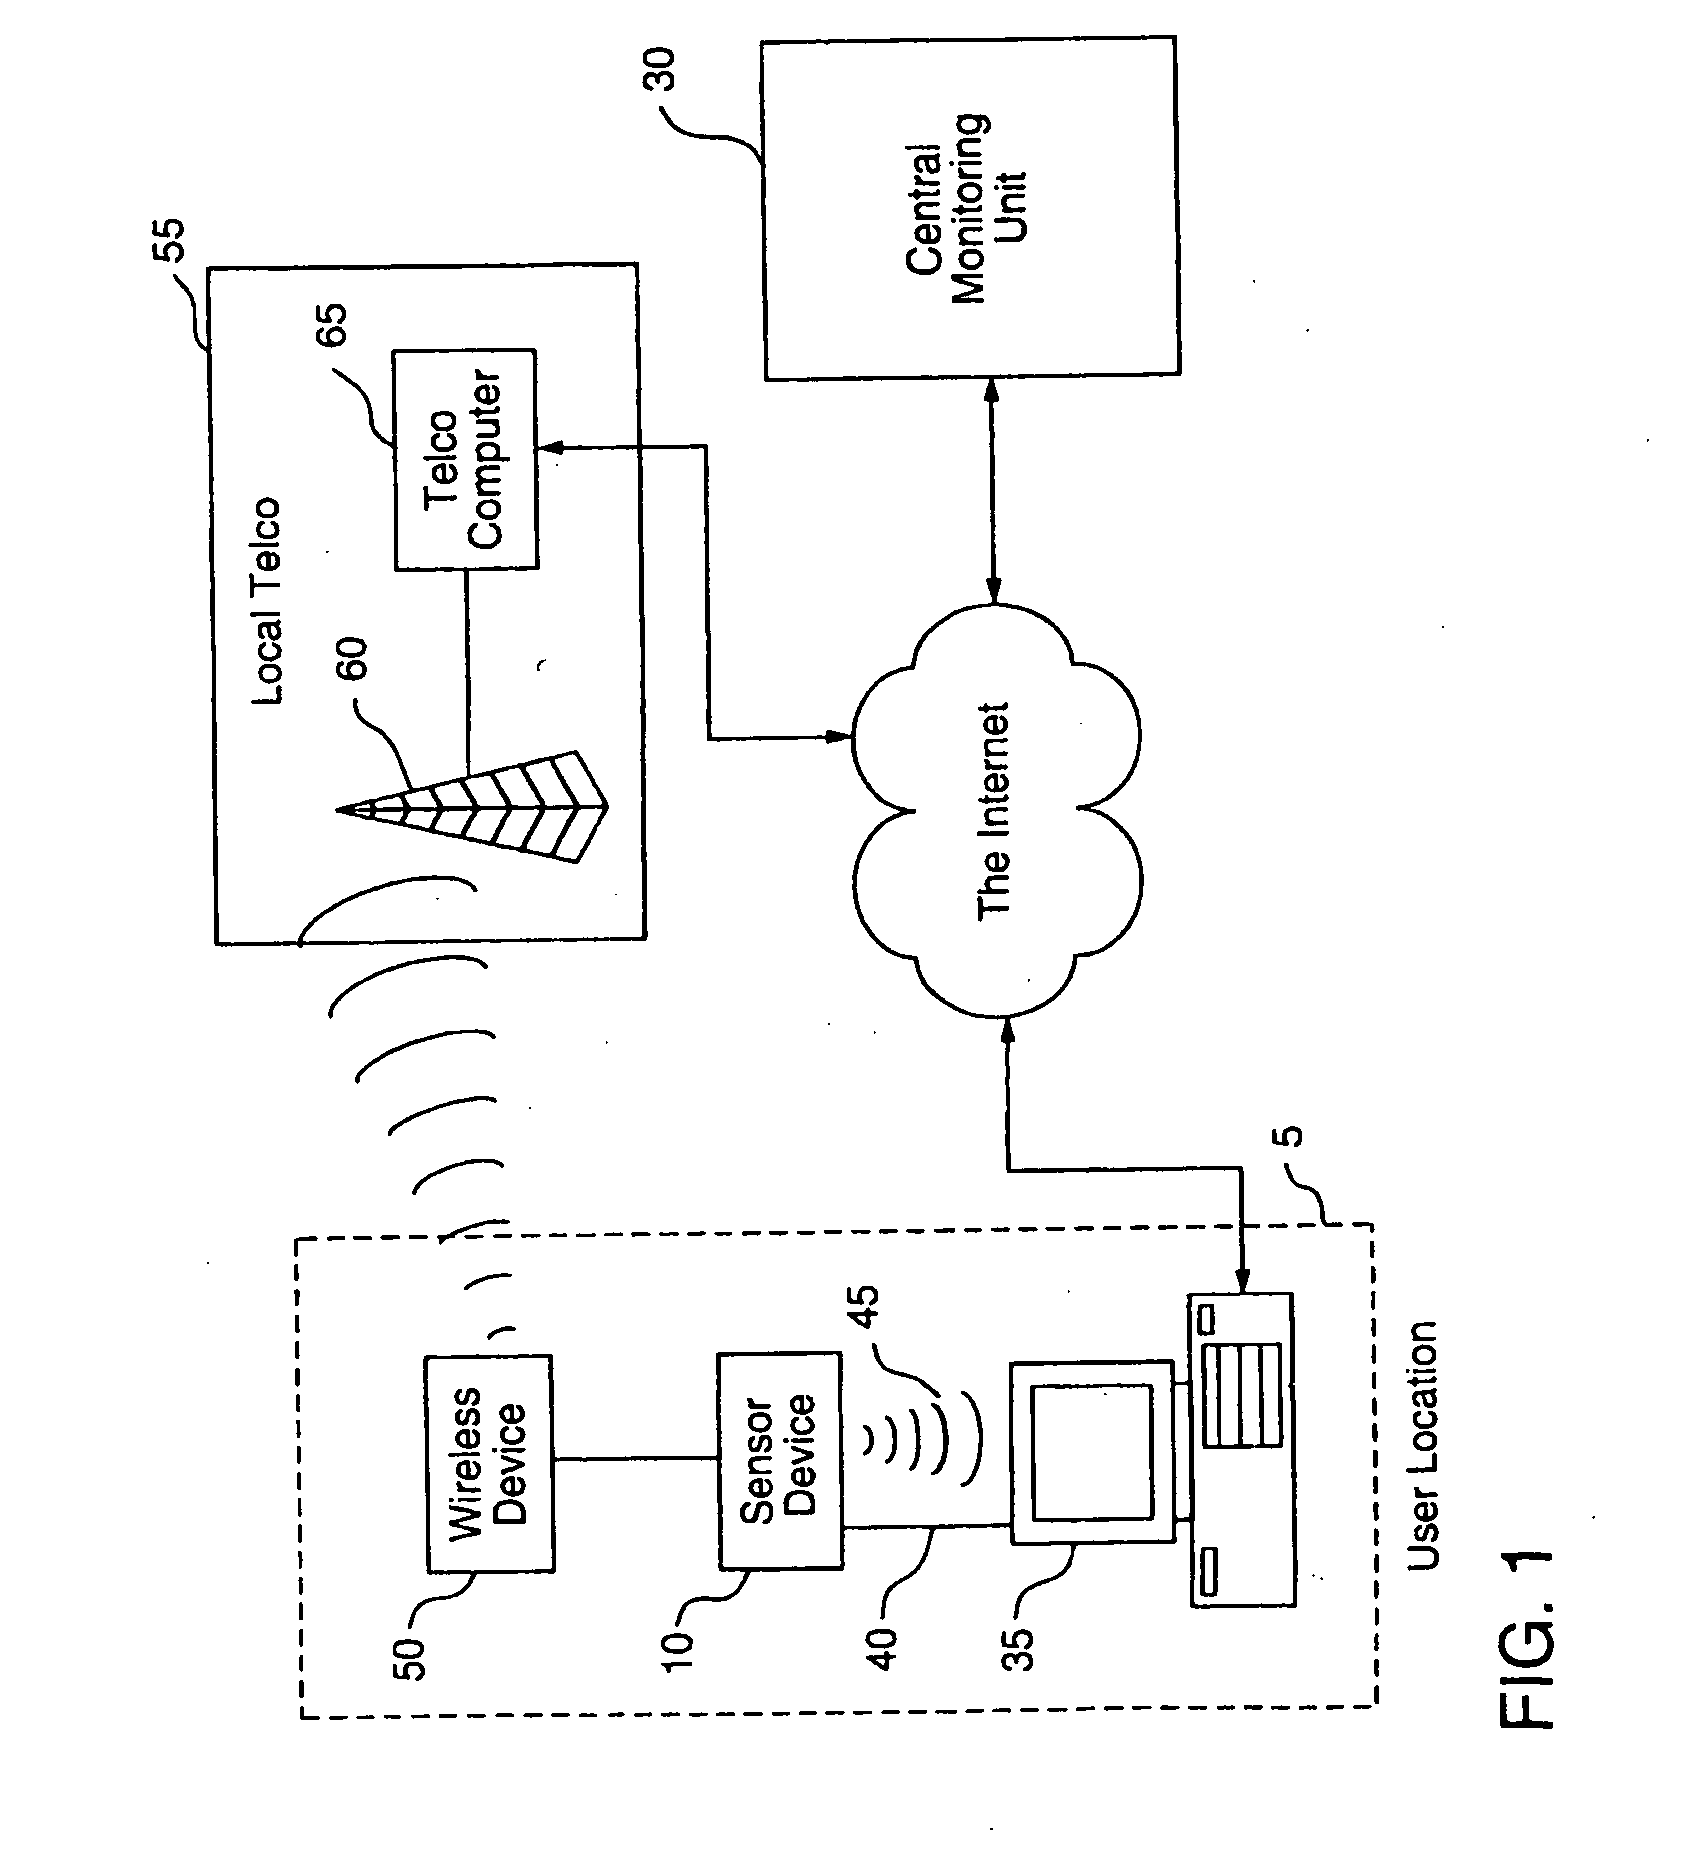 Wireless communications device and personal monitor